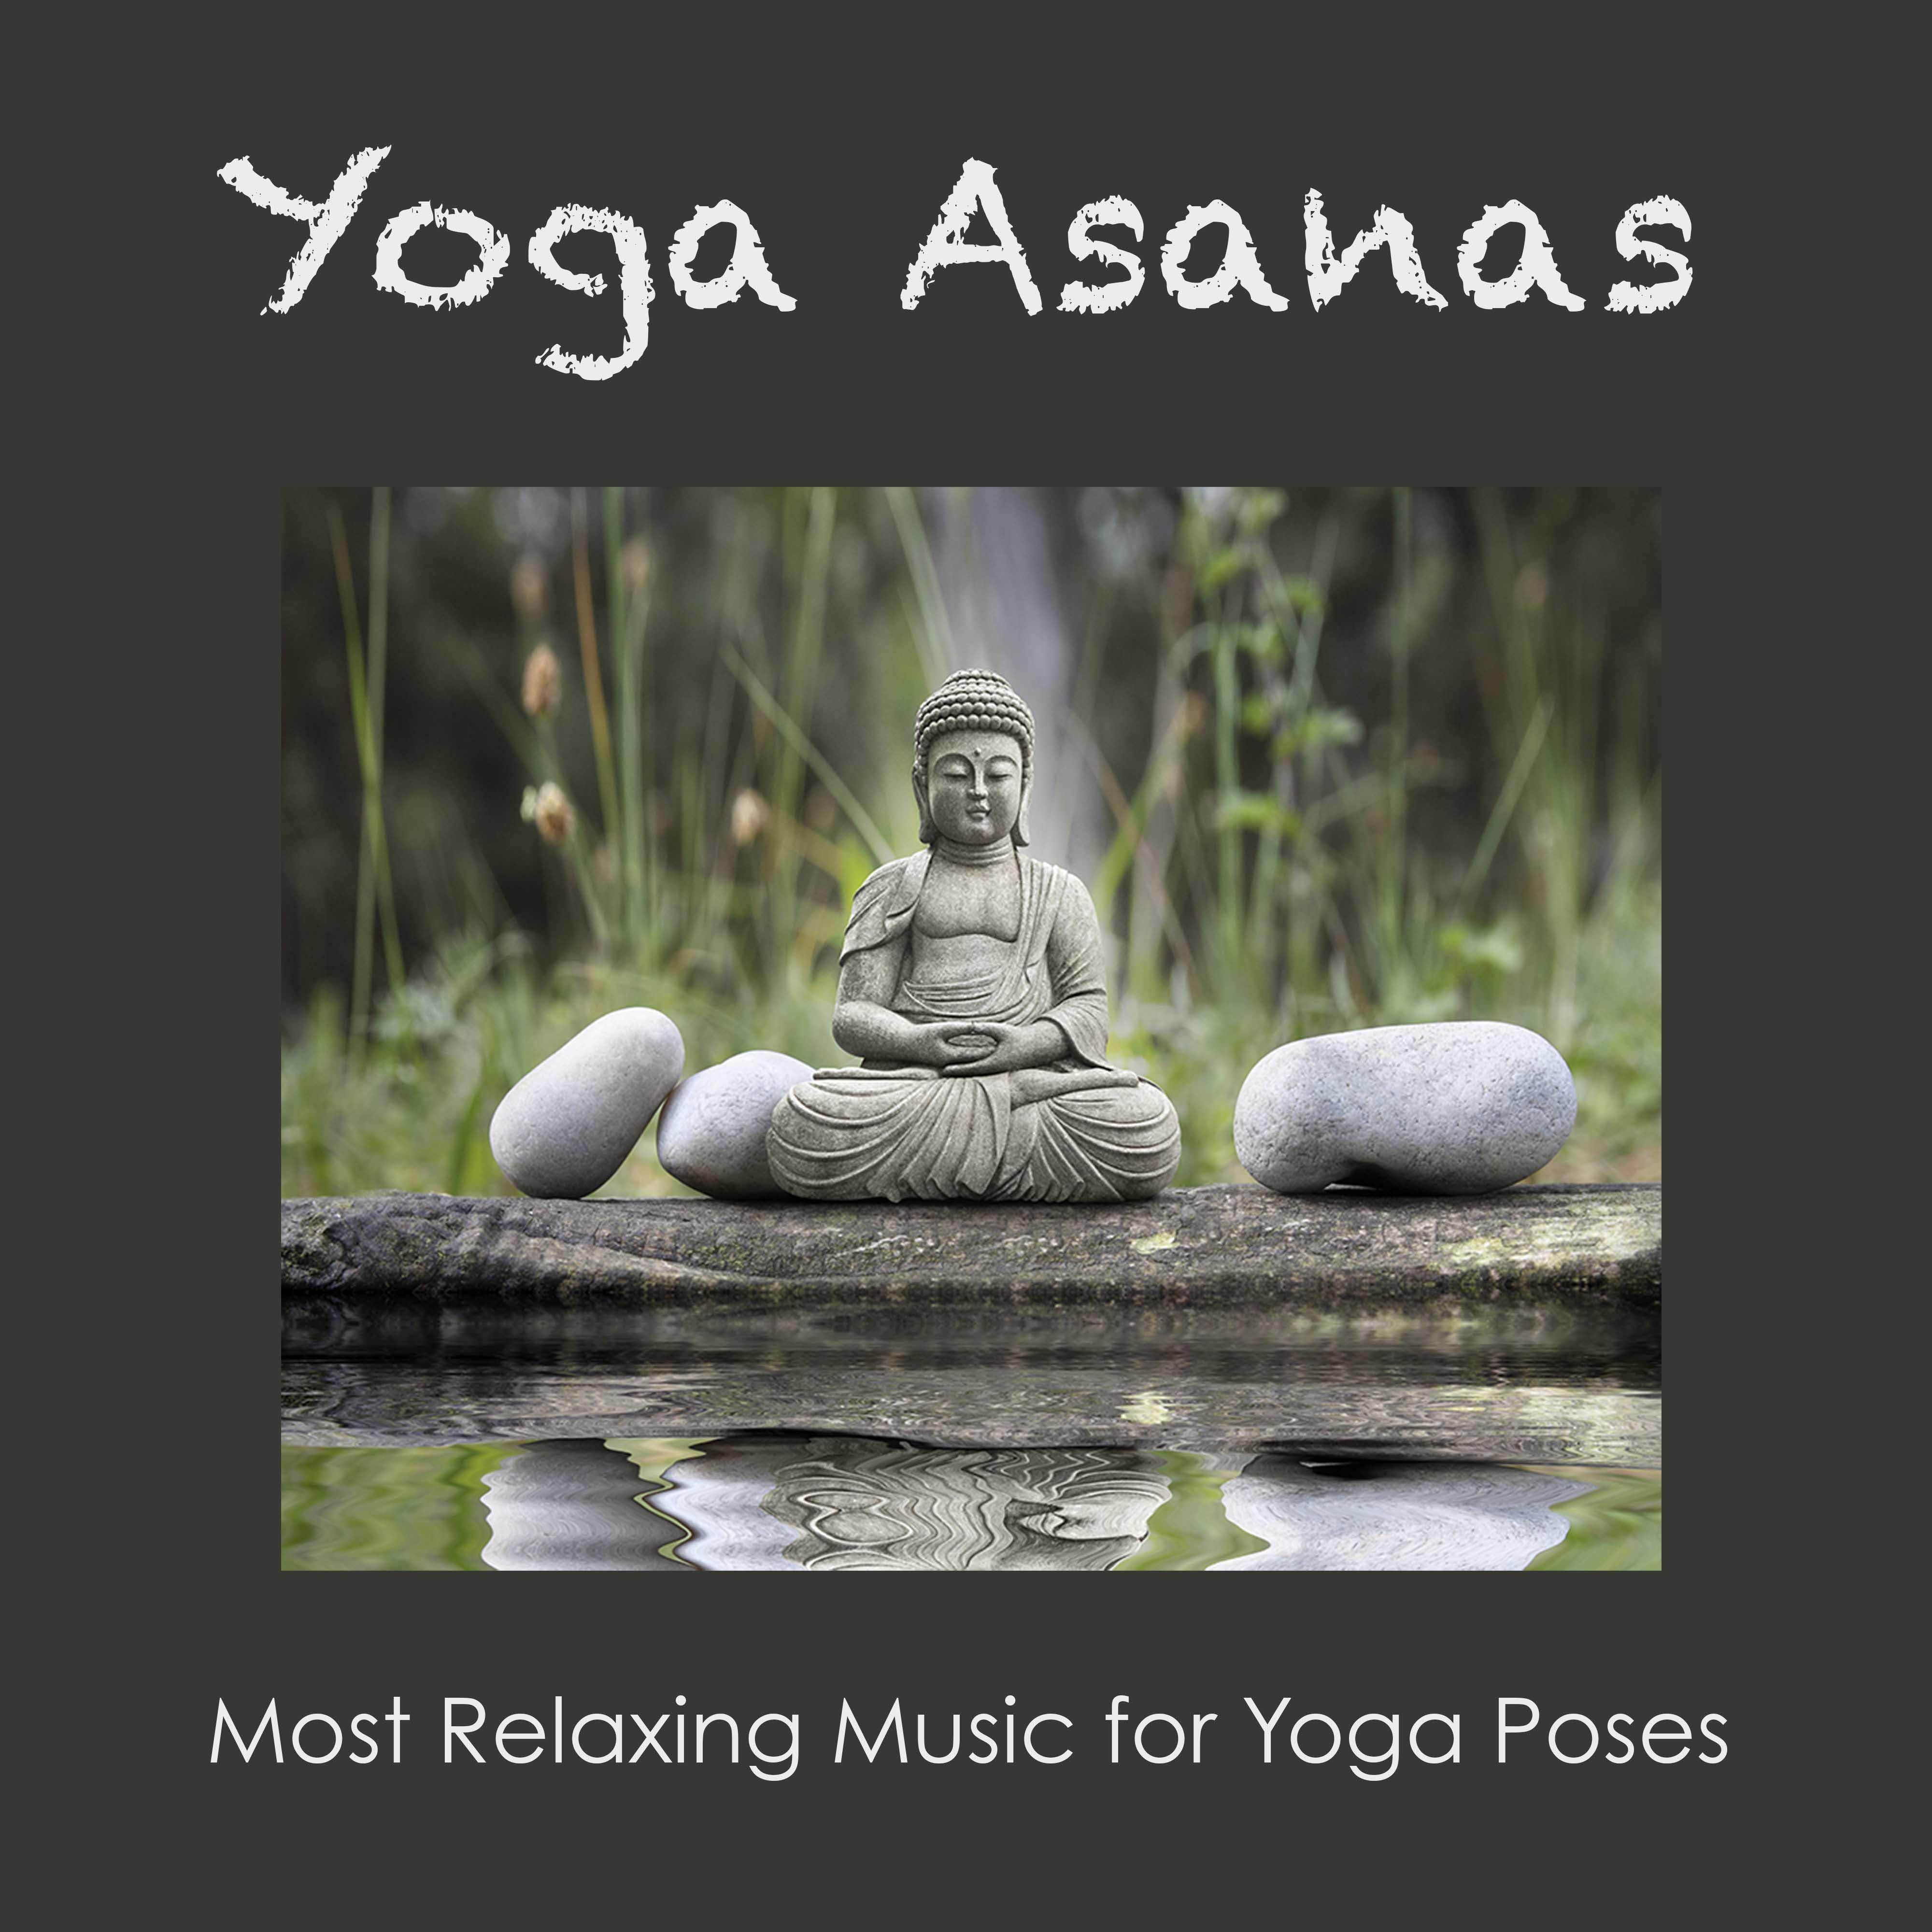 Yoga Asanas: Body Mind Yoga Meditation Relaxation "Solo Piano" Music, Most Relaxing Music for Yoga Poses